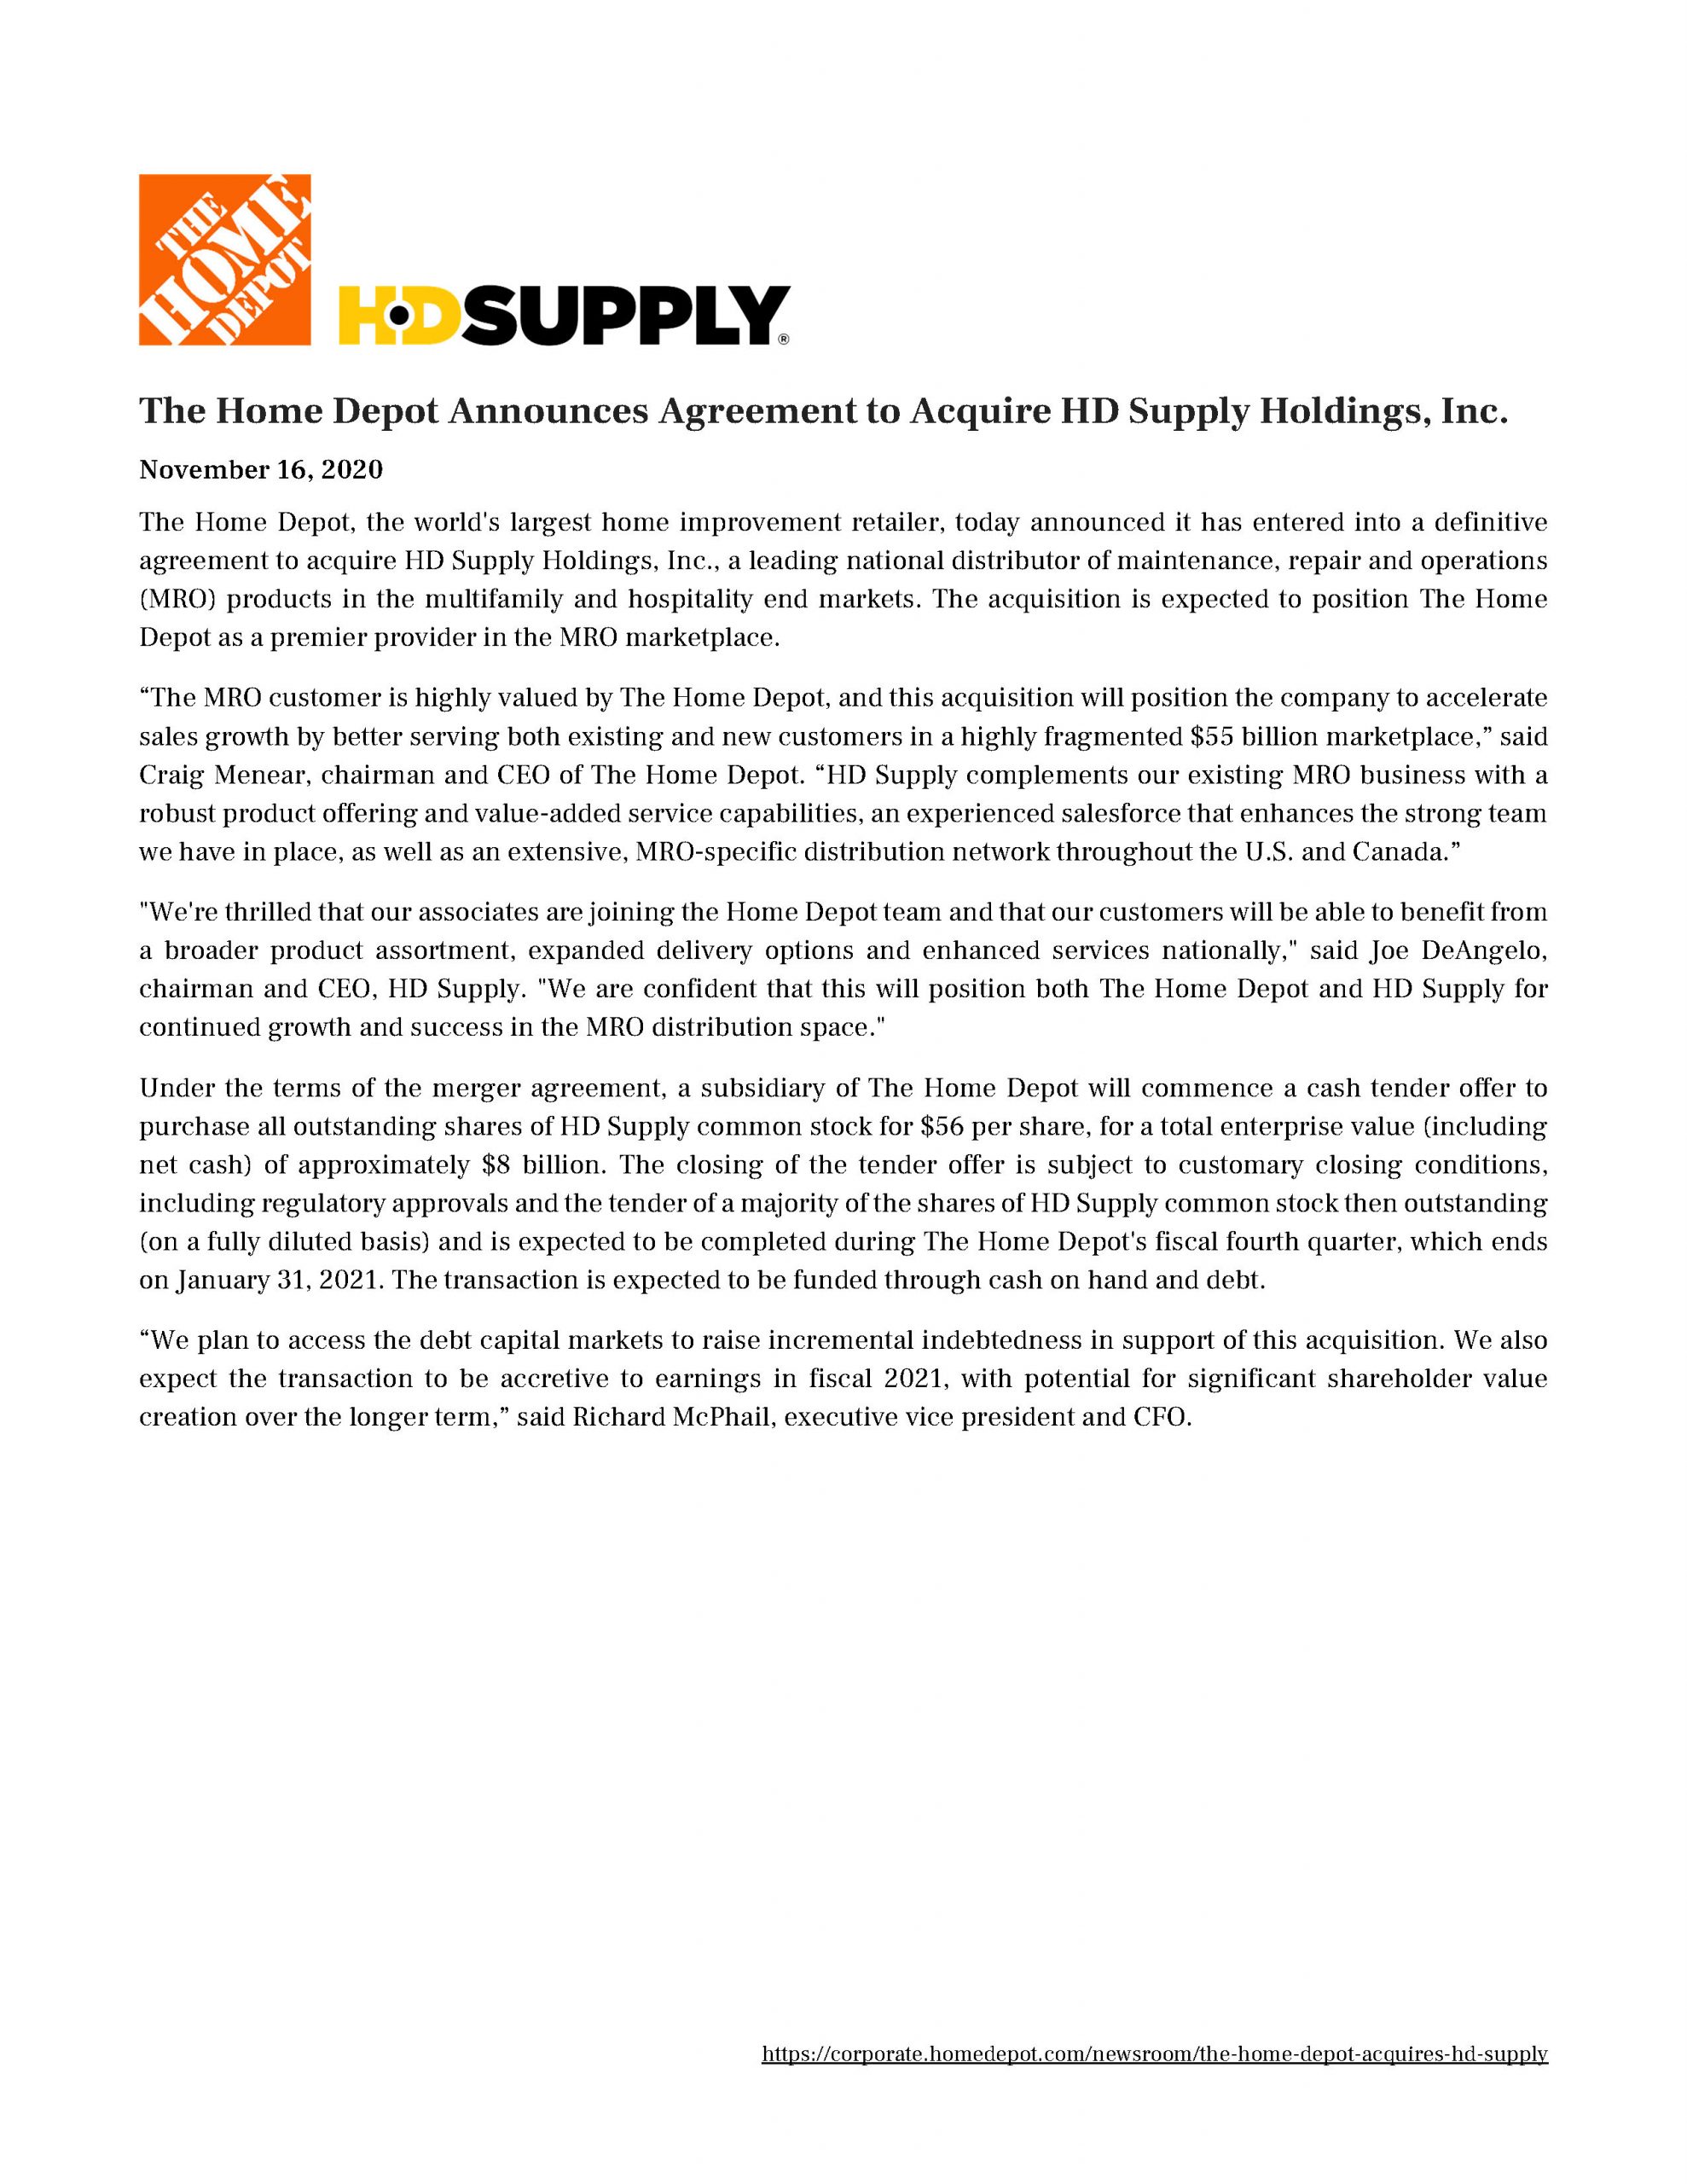 The Home Depot Announces Agreement To Acquire HD Supply Holdings, Inc. 11.16.2020